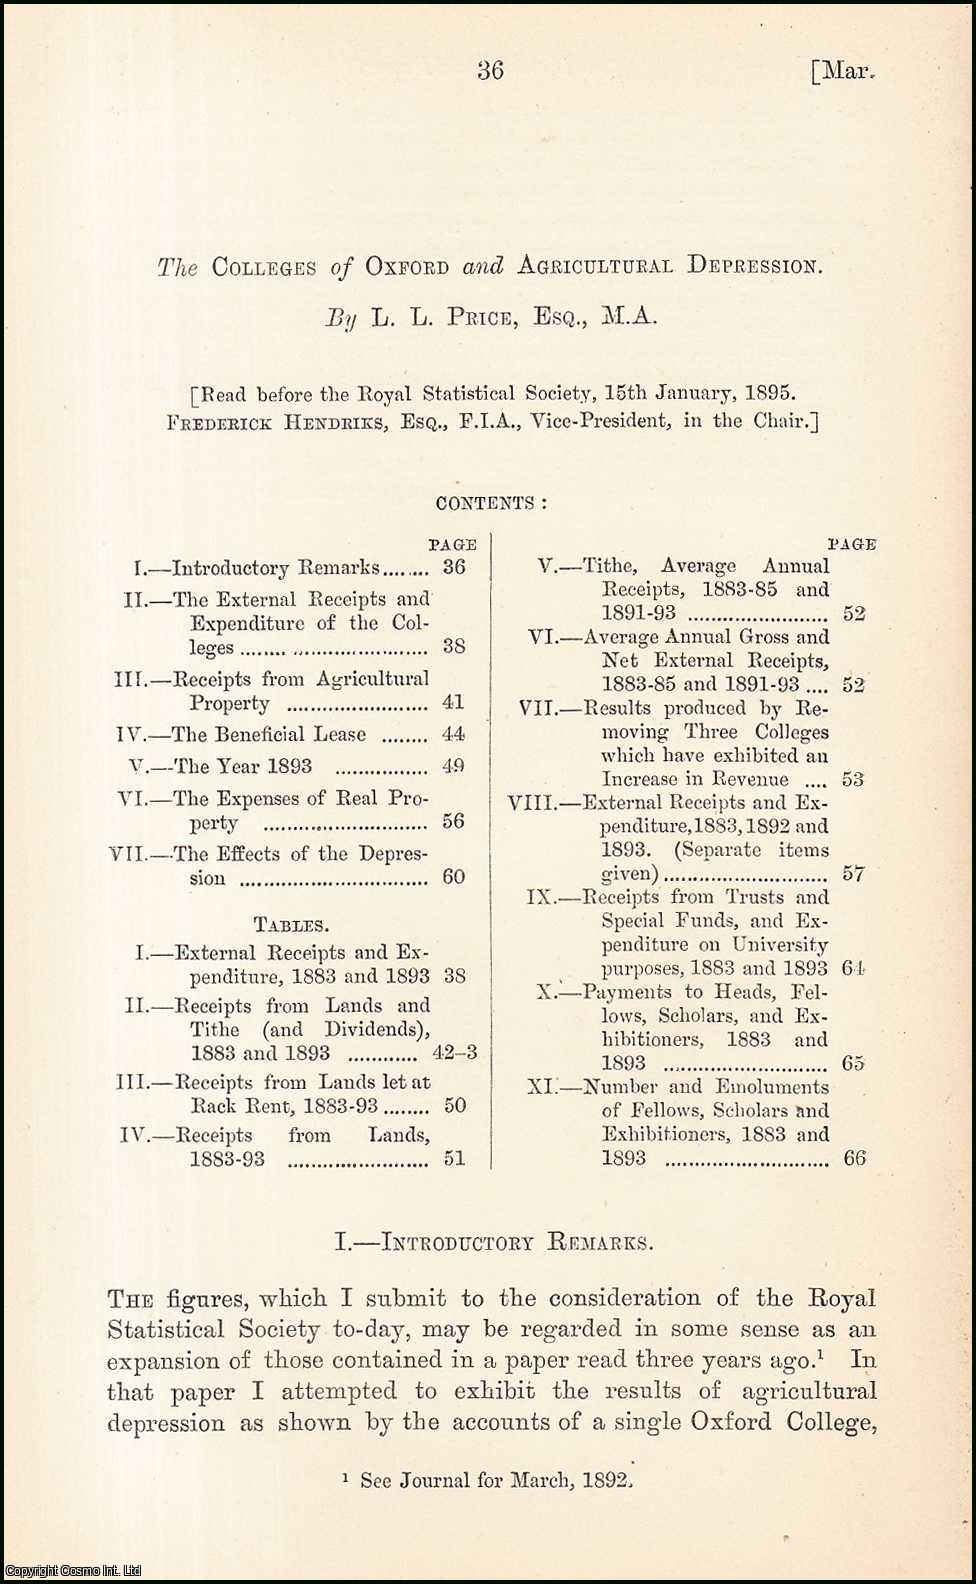 L.L.Price, Esq., M.A. - The College of Oxford & Agricultural Depression. An uncommon original article from the Journal of the Royal Statistical Society of London, 1895.